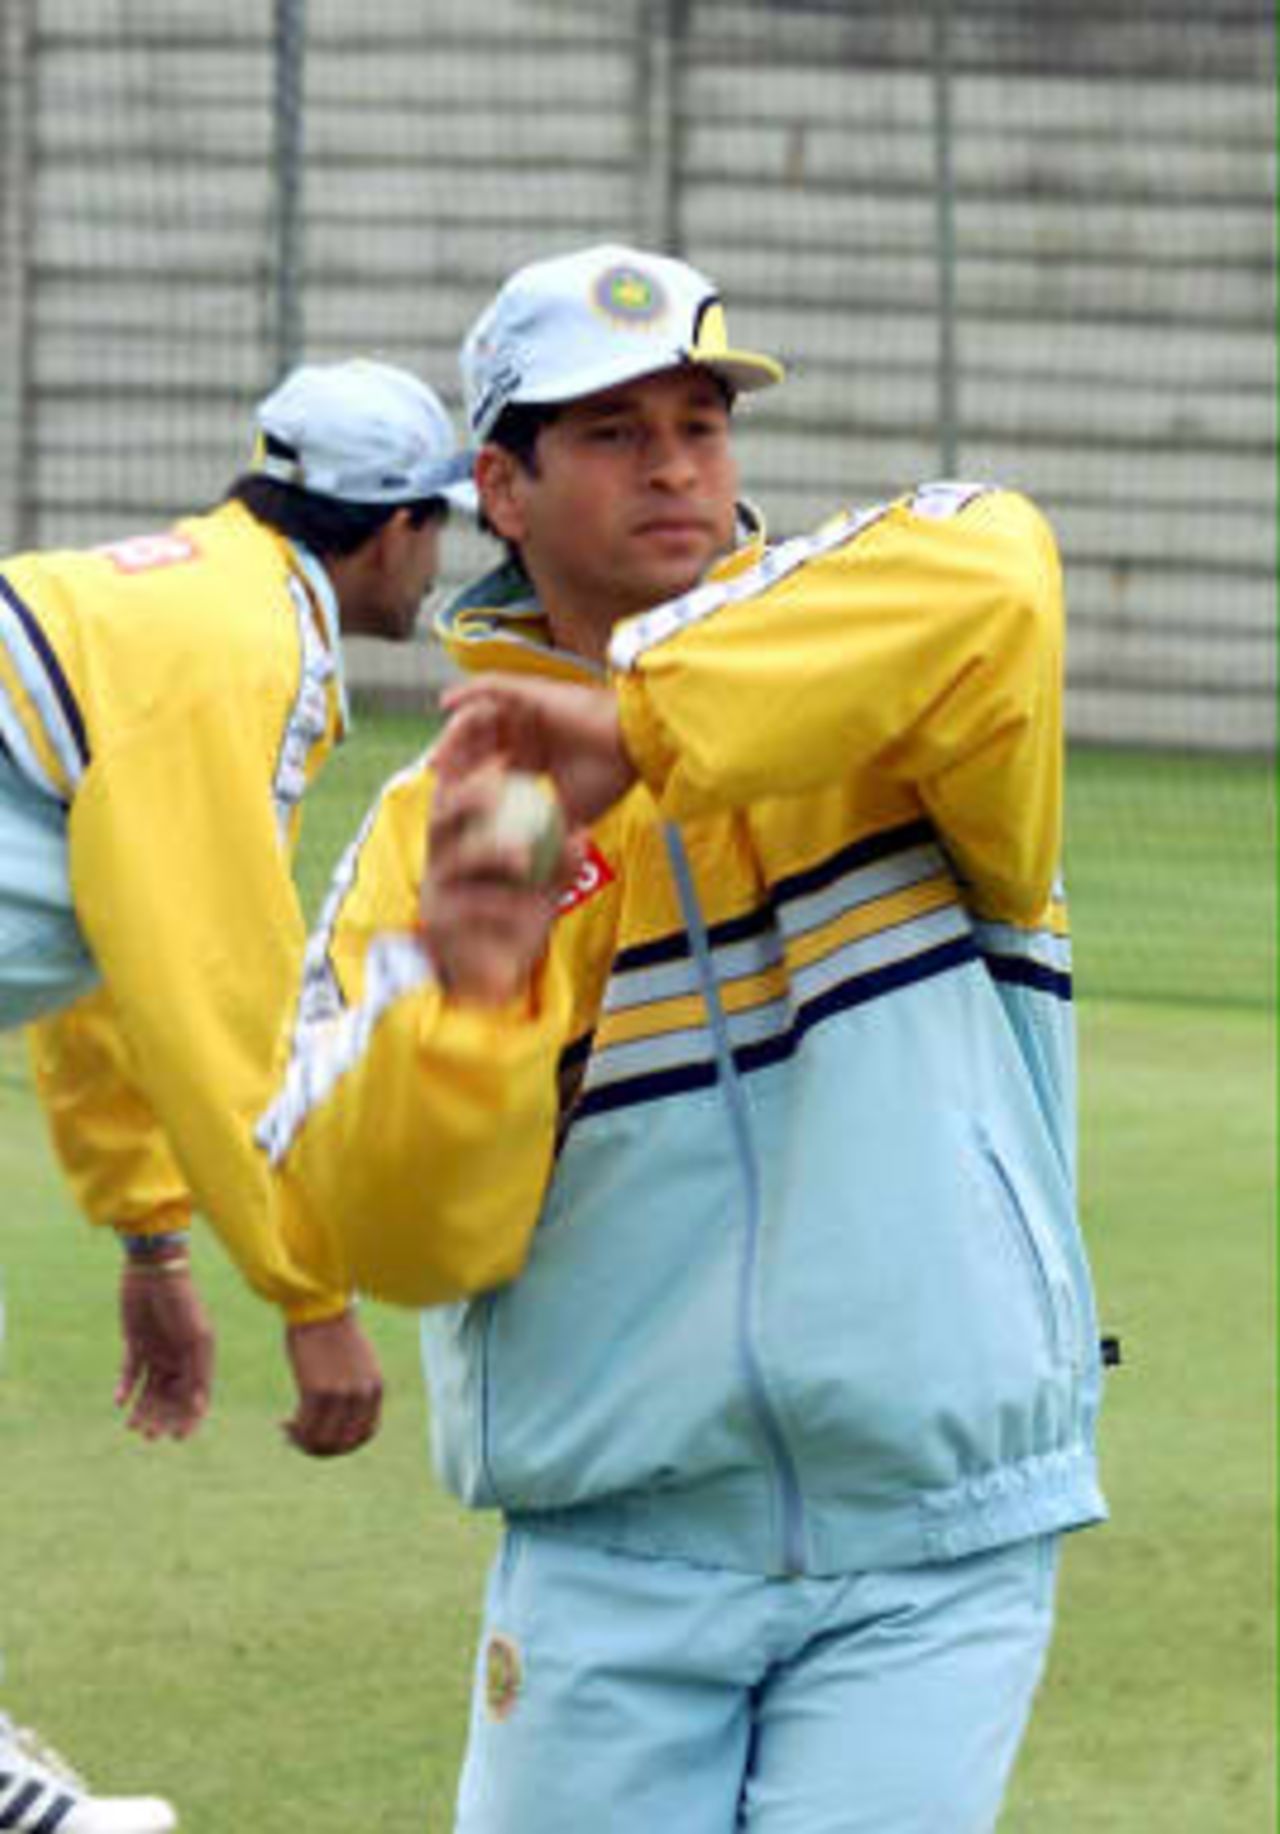 Sachin Tendulkar bowls during net practice in Leicester, 18 May 1999